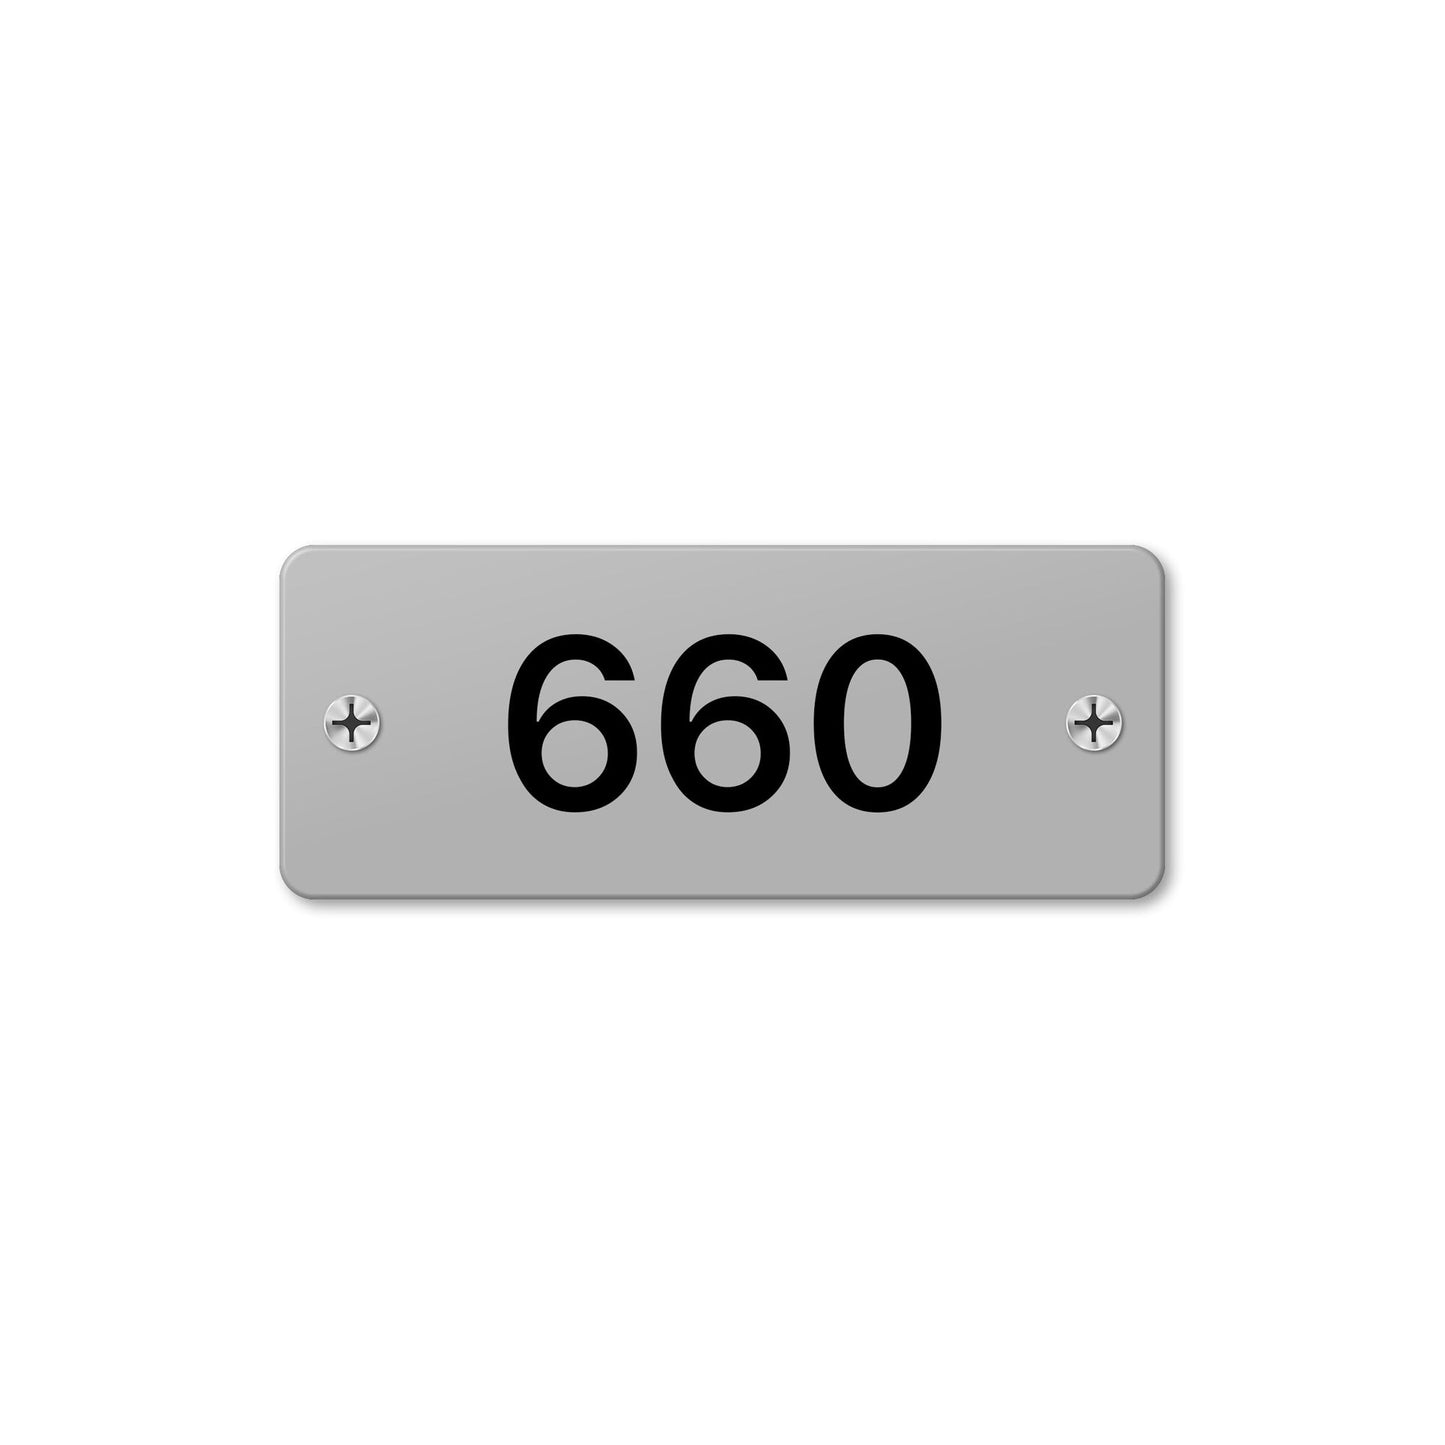 Numeral 660